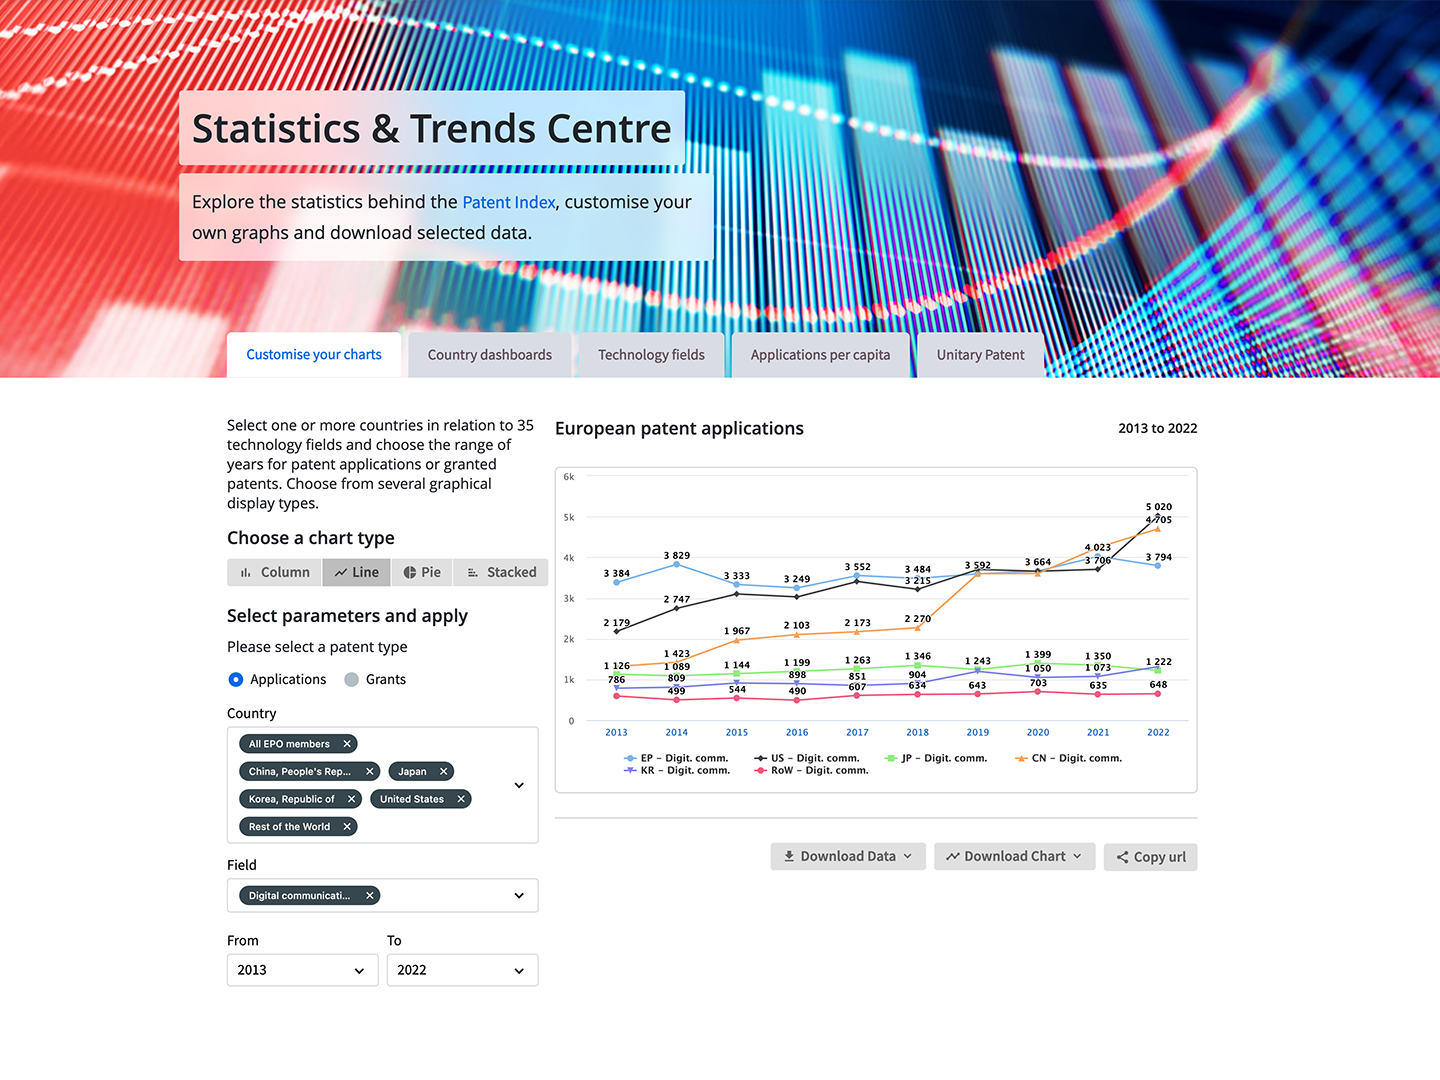 Patent Index and the statistics and trends centre (STC)